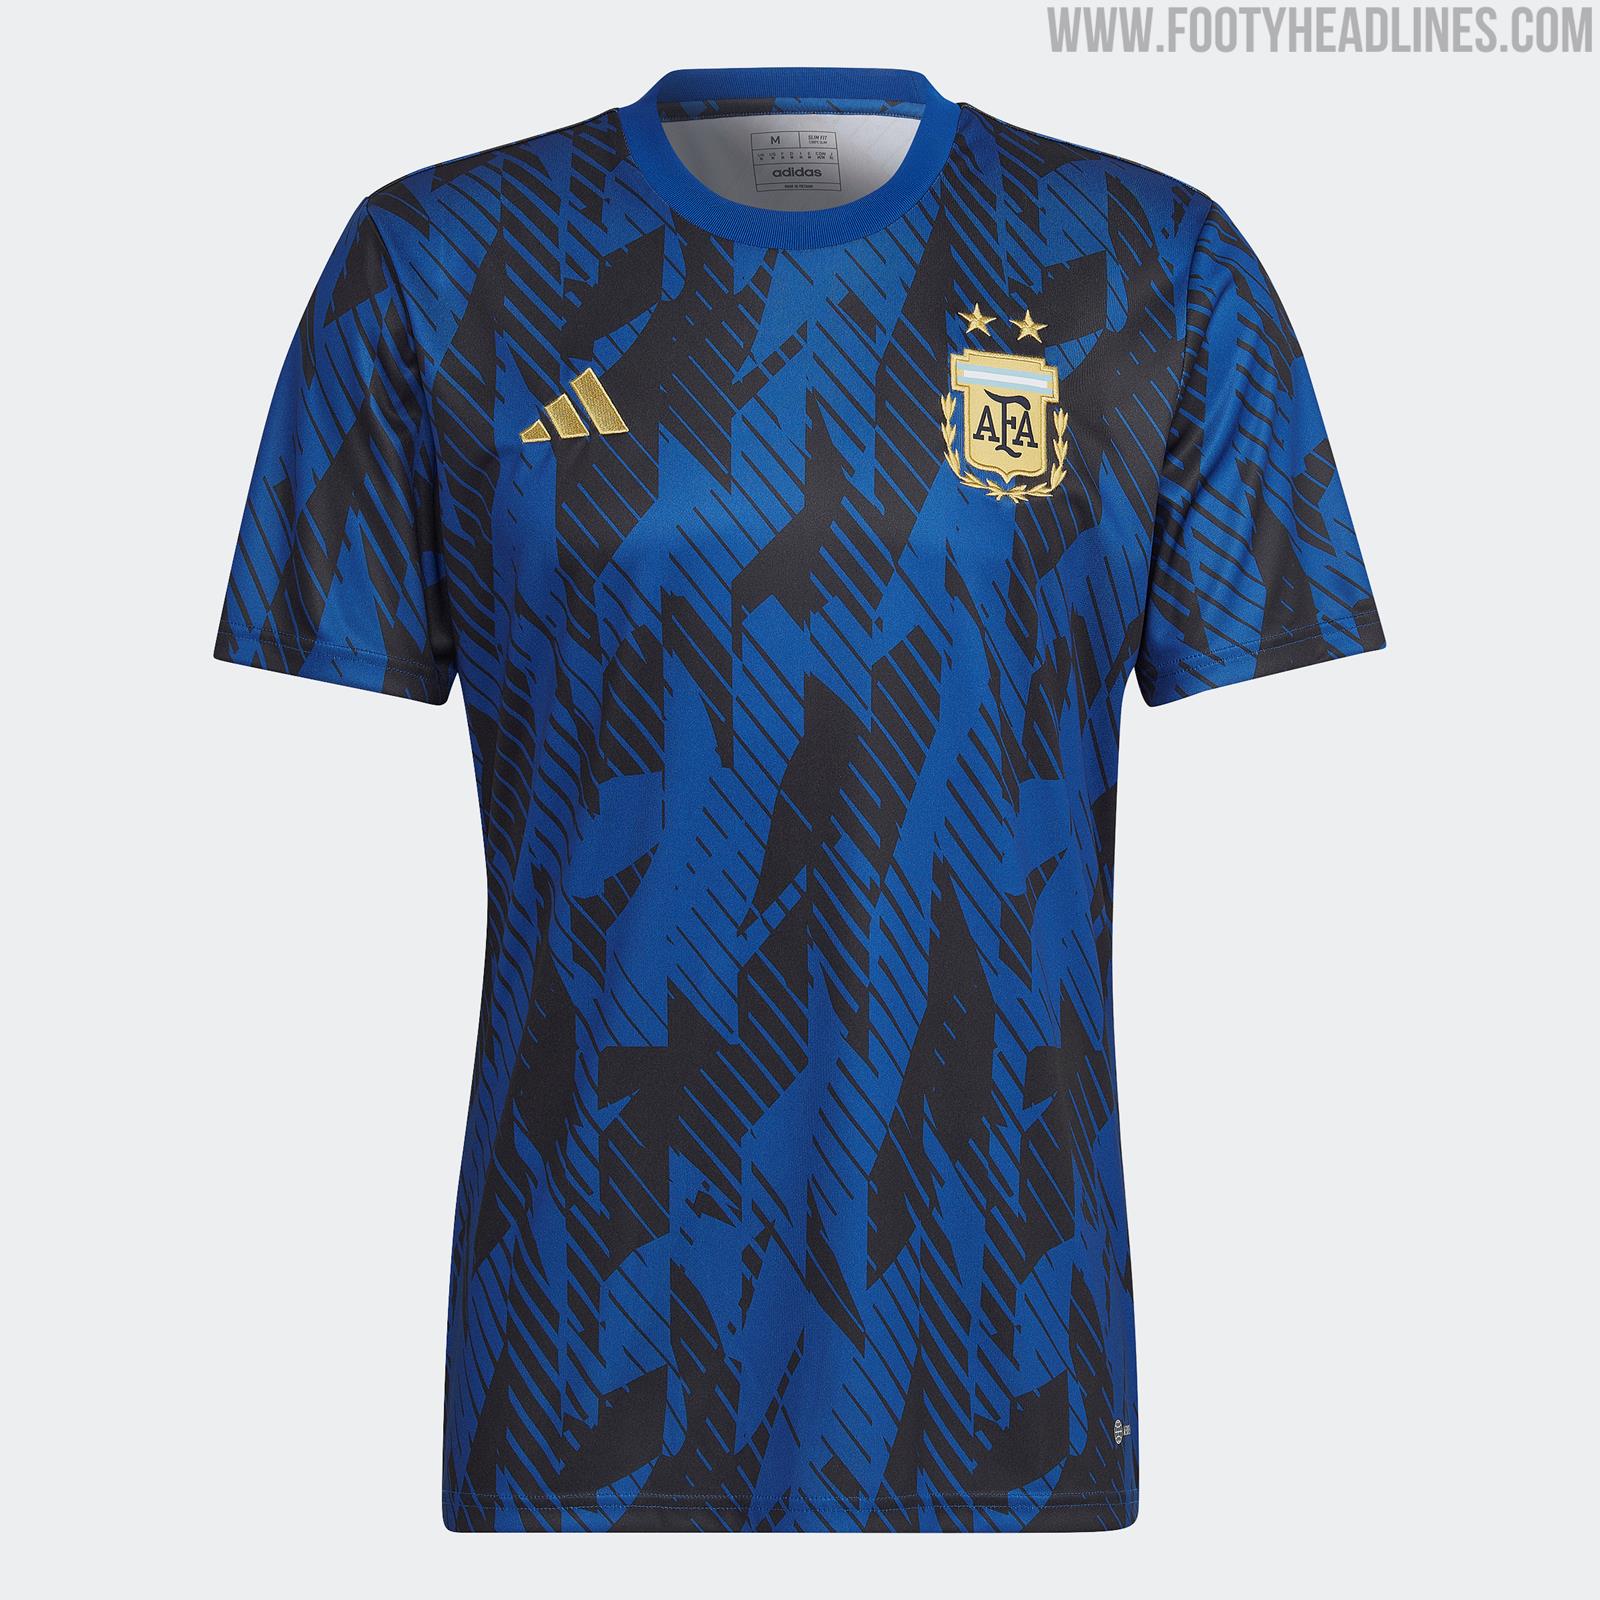 Argentina 2022 World Cup Away Kit Released - Footy Headlines